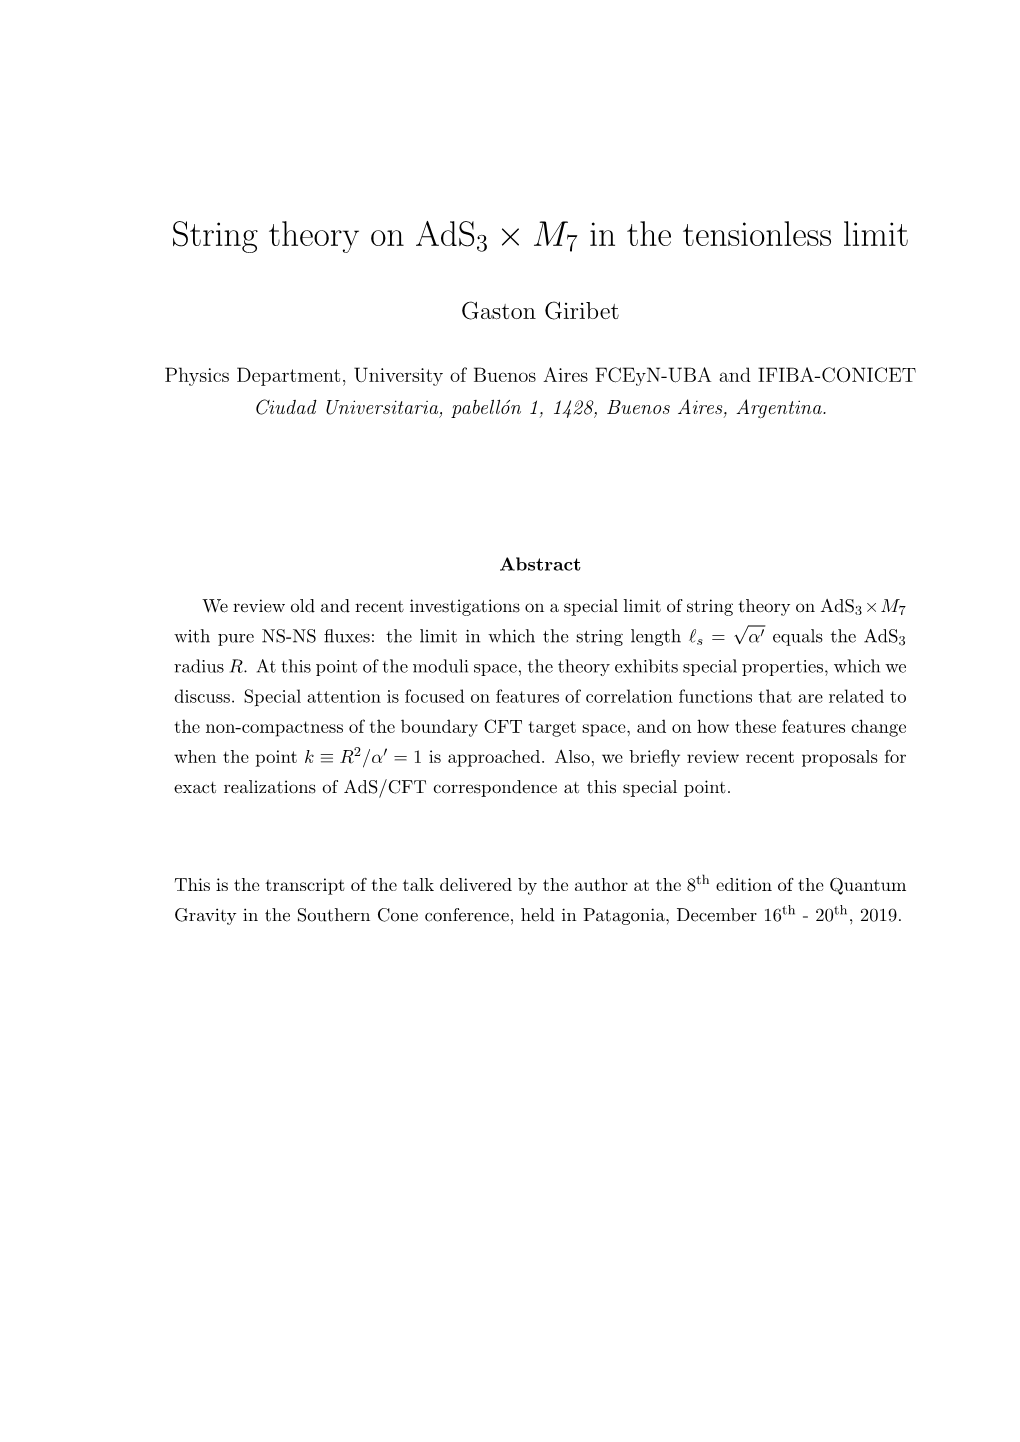 String Theory on Ads3 × M7 in the Tensionless Limit